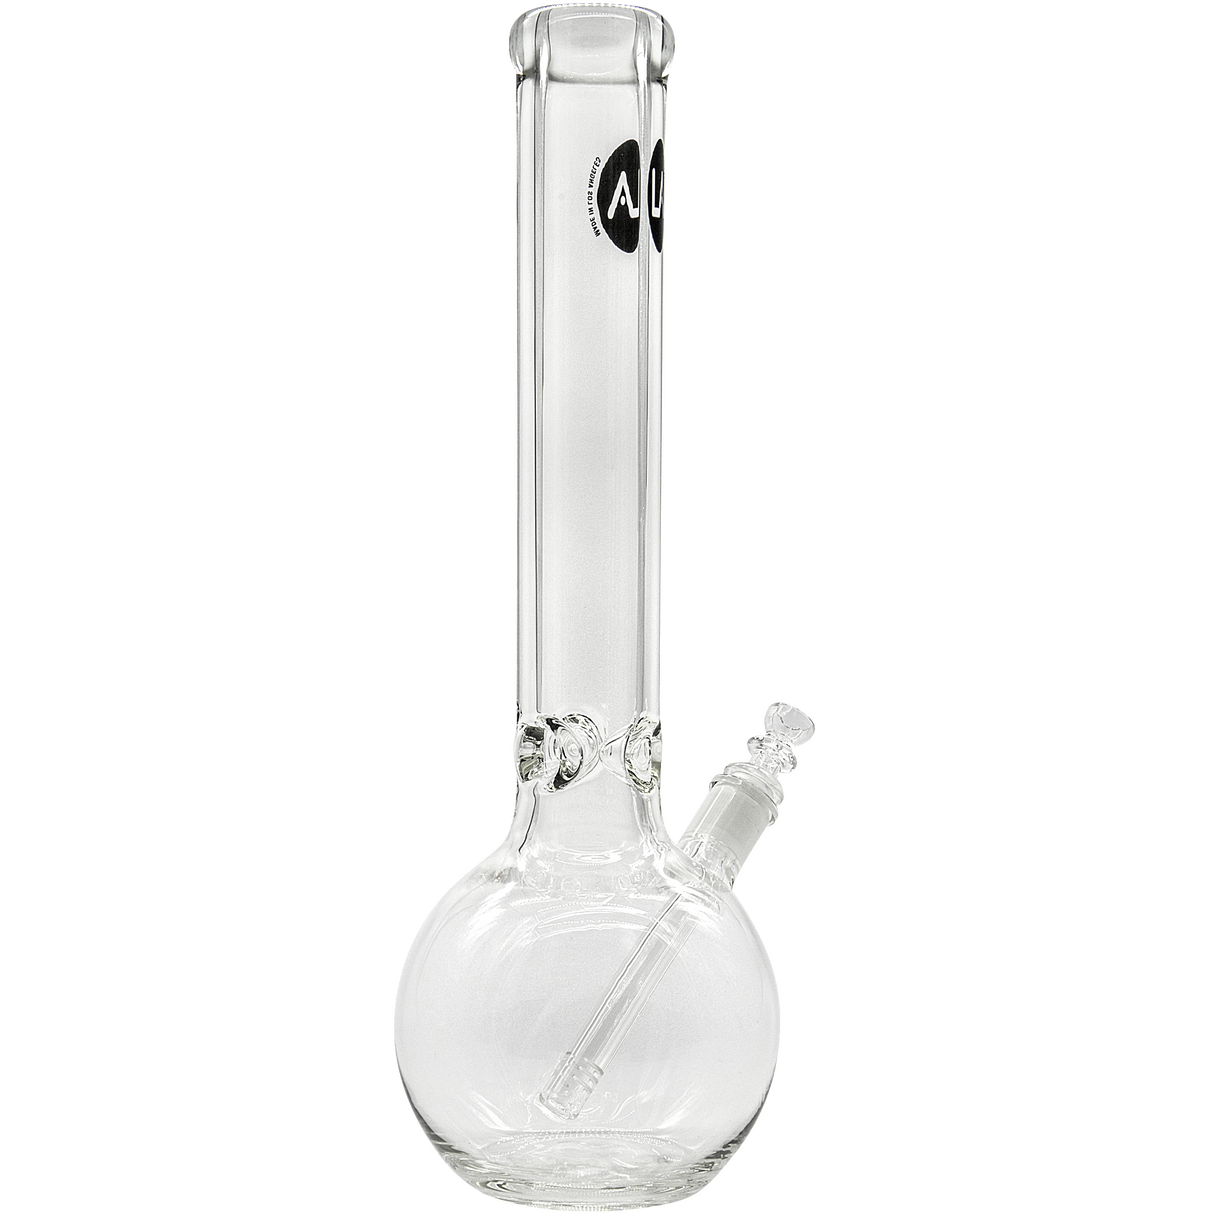 LA Pipes "Iron Mace" 9mm Thick Glass Bubble Bong with 45 Degree Joint - Front View